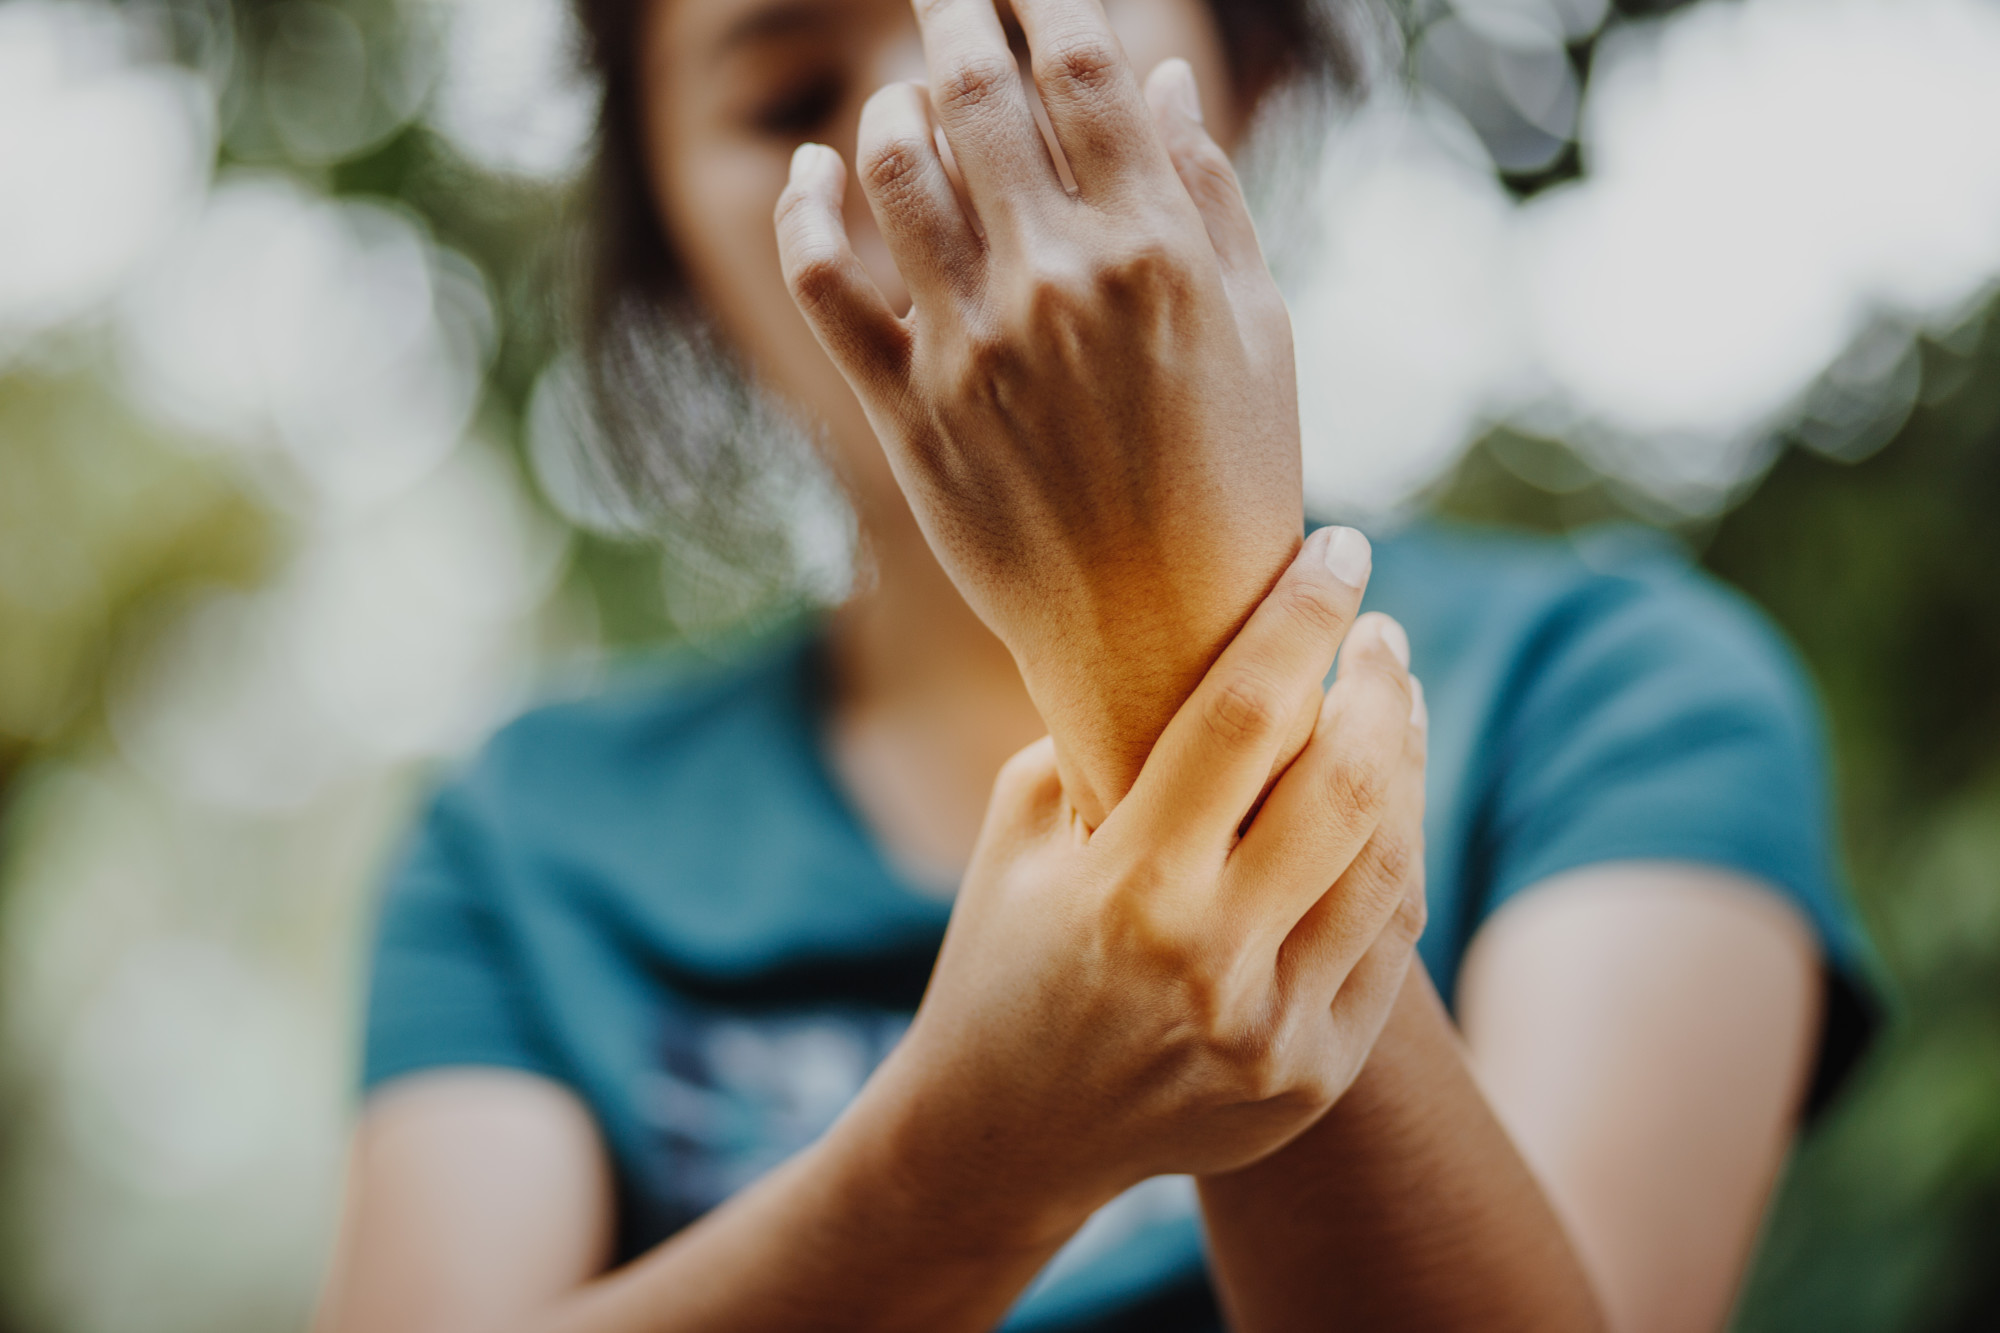 What Are the Common Causes of Wrist Pain?